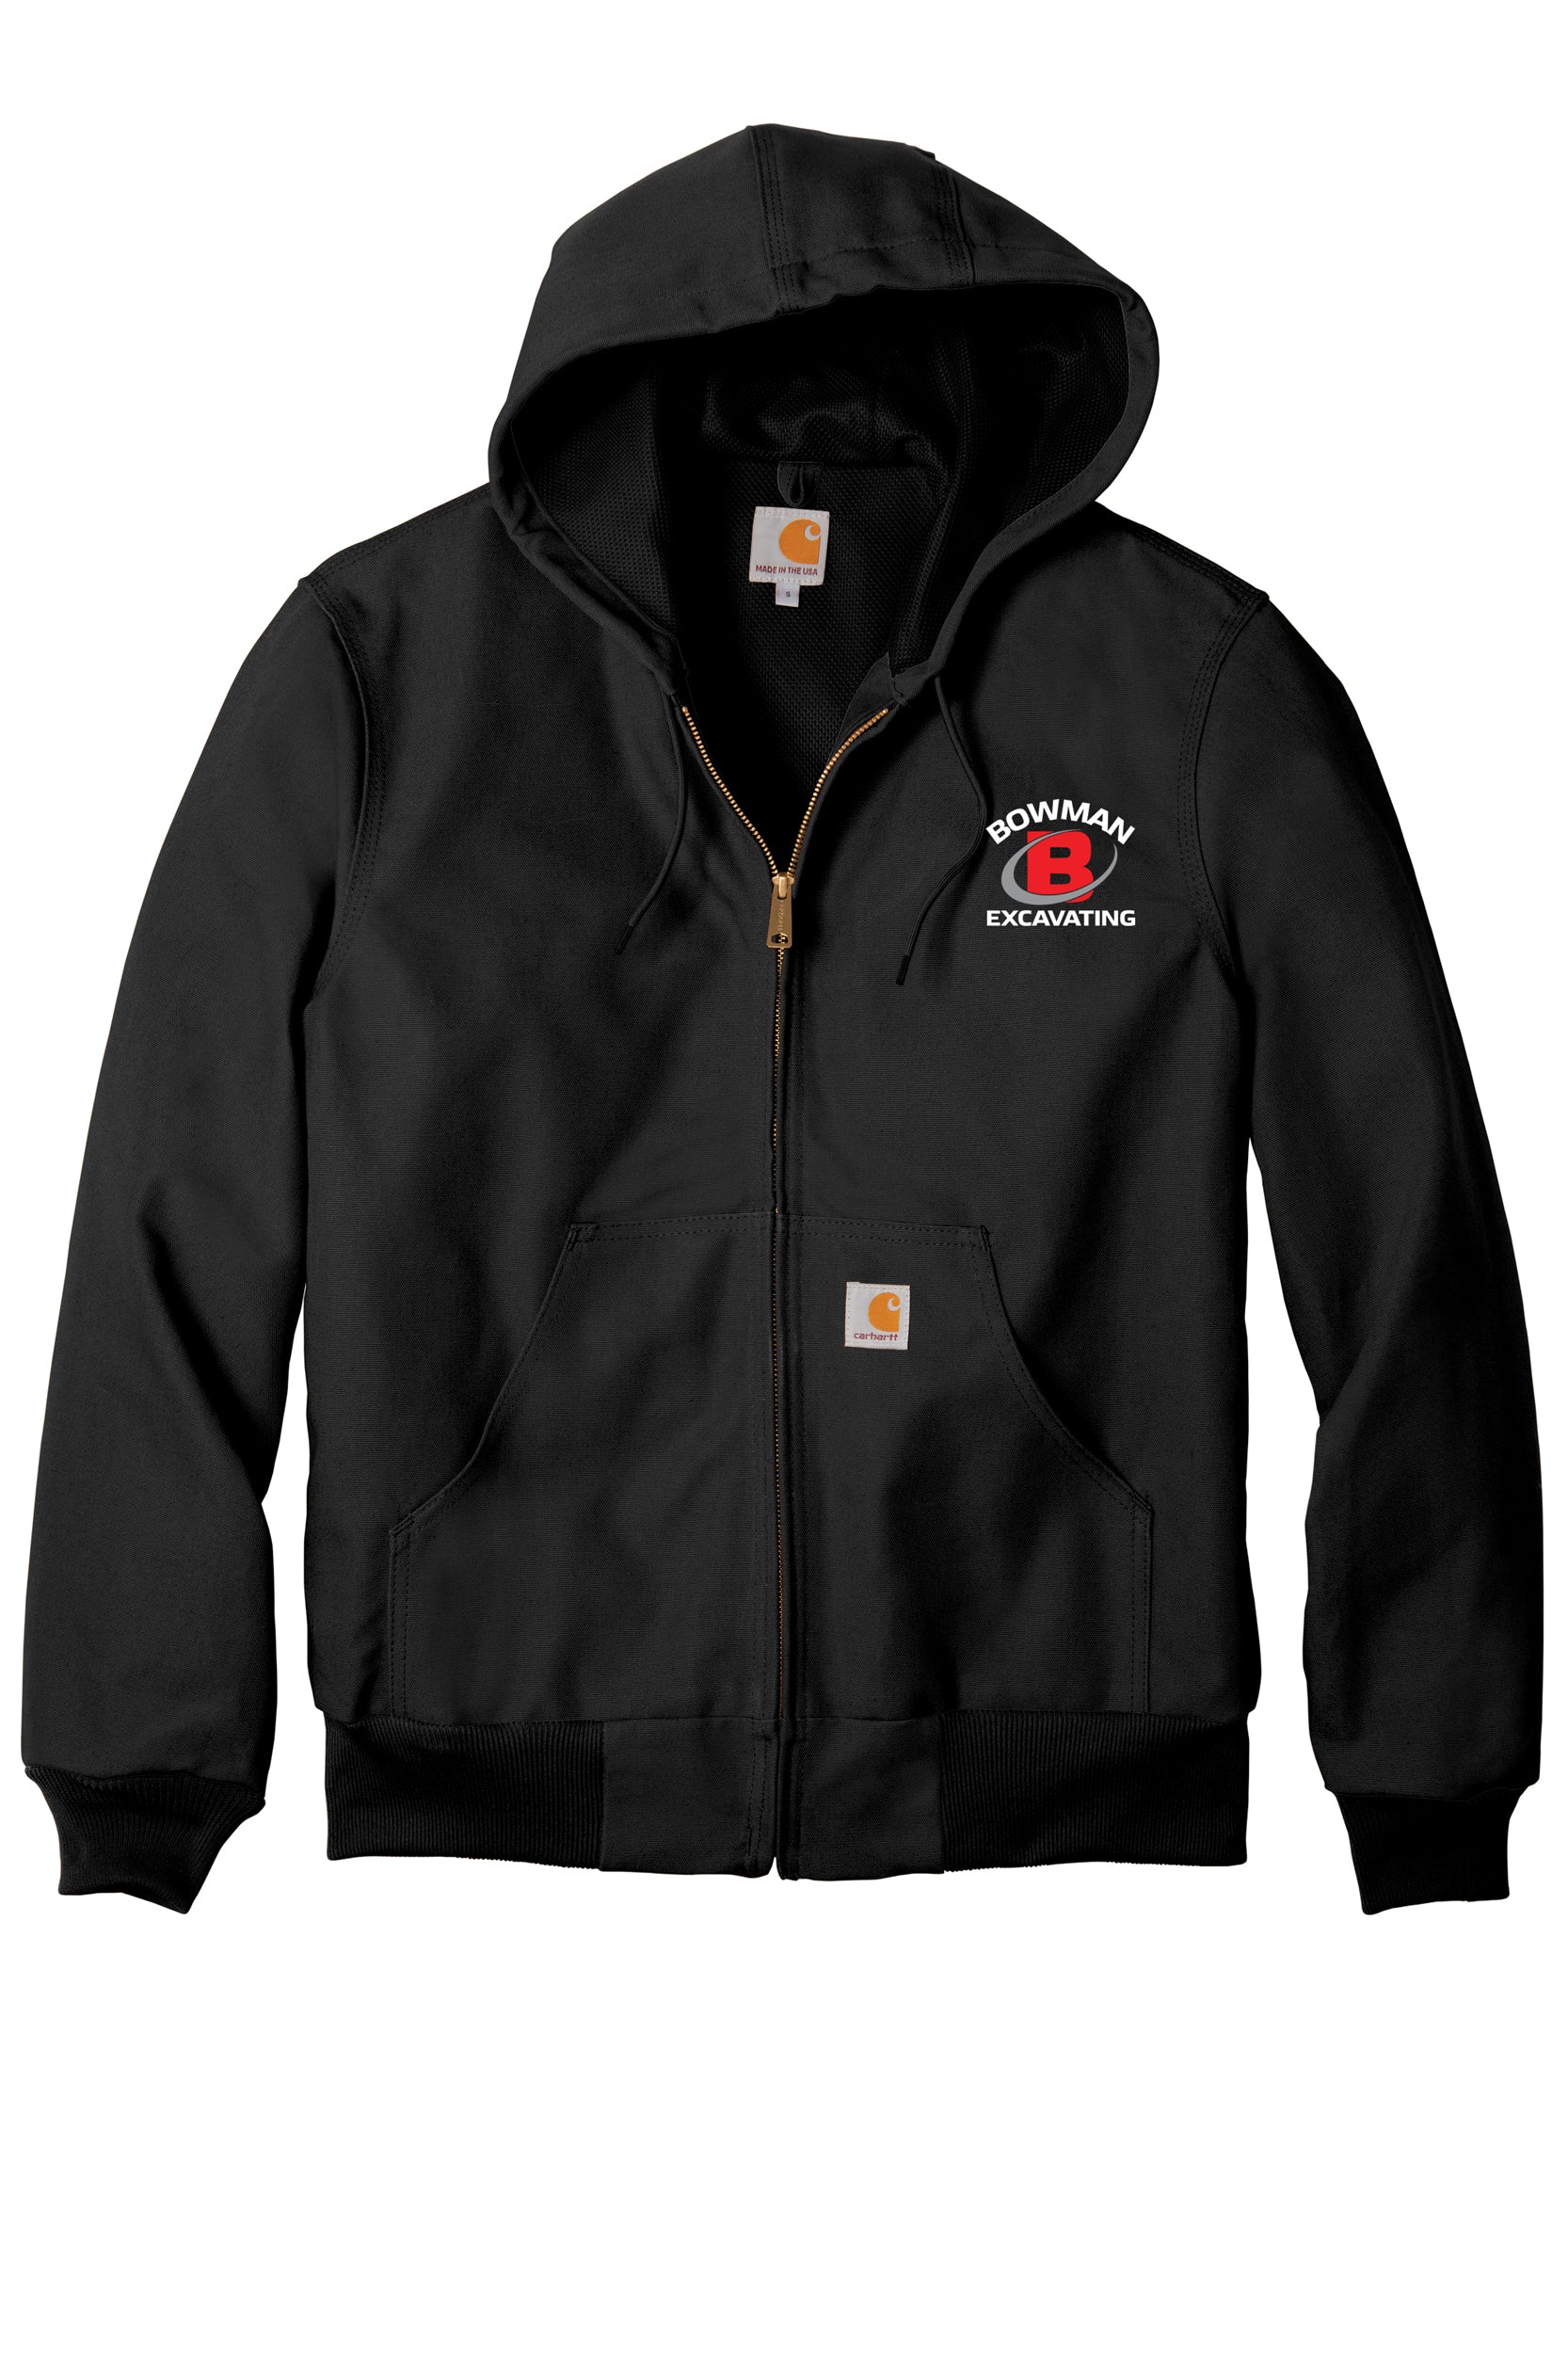 Bowman Excavating  - Carhartt Thermal-Lined Duck Active Jacket